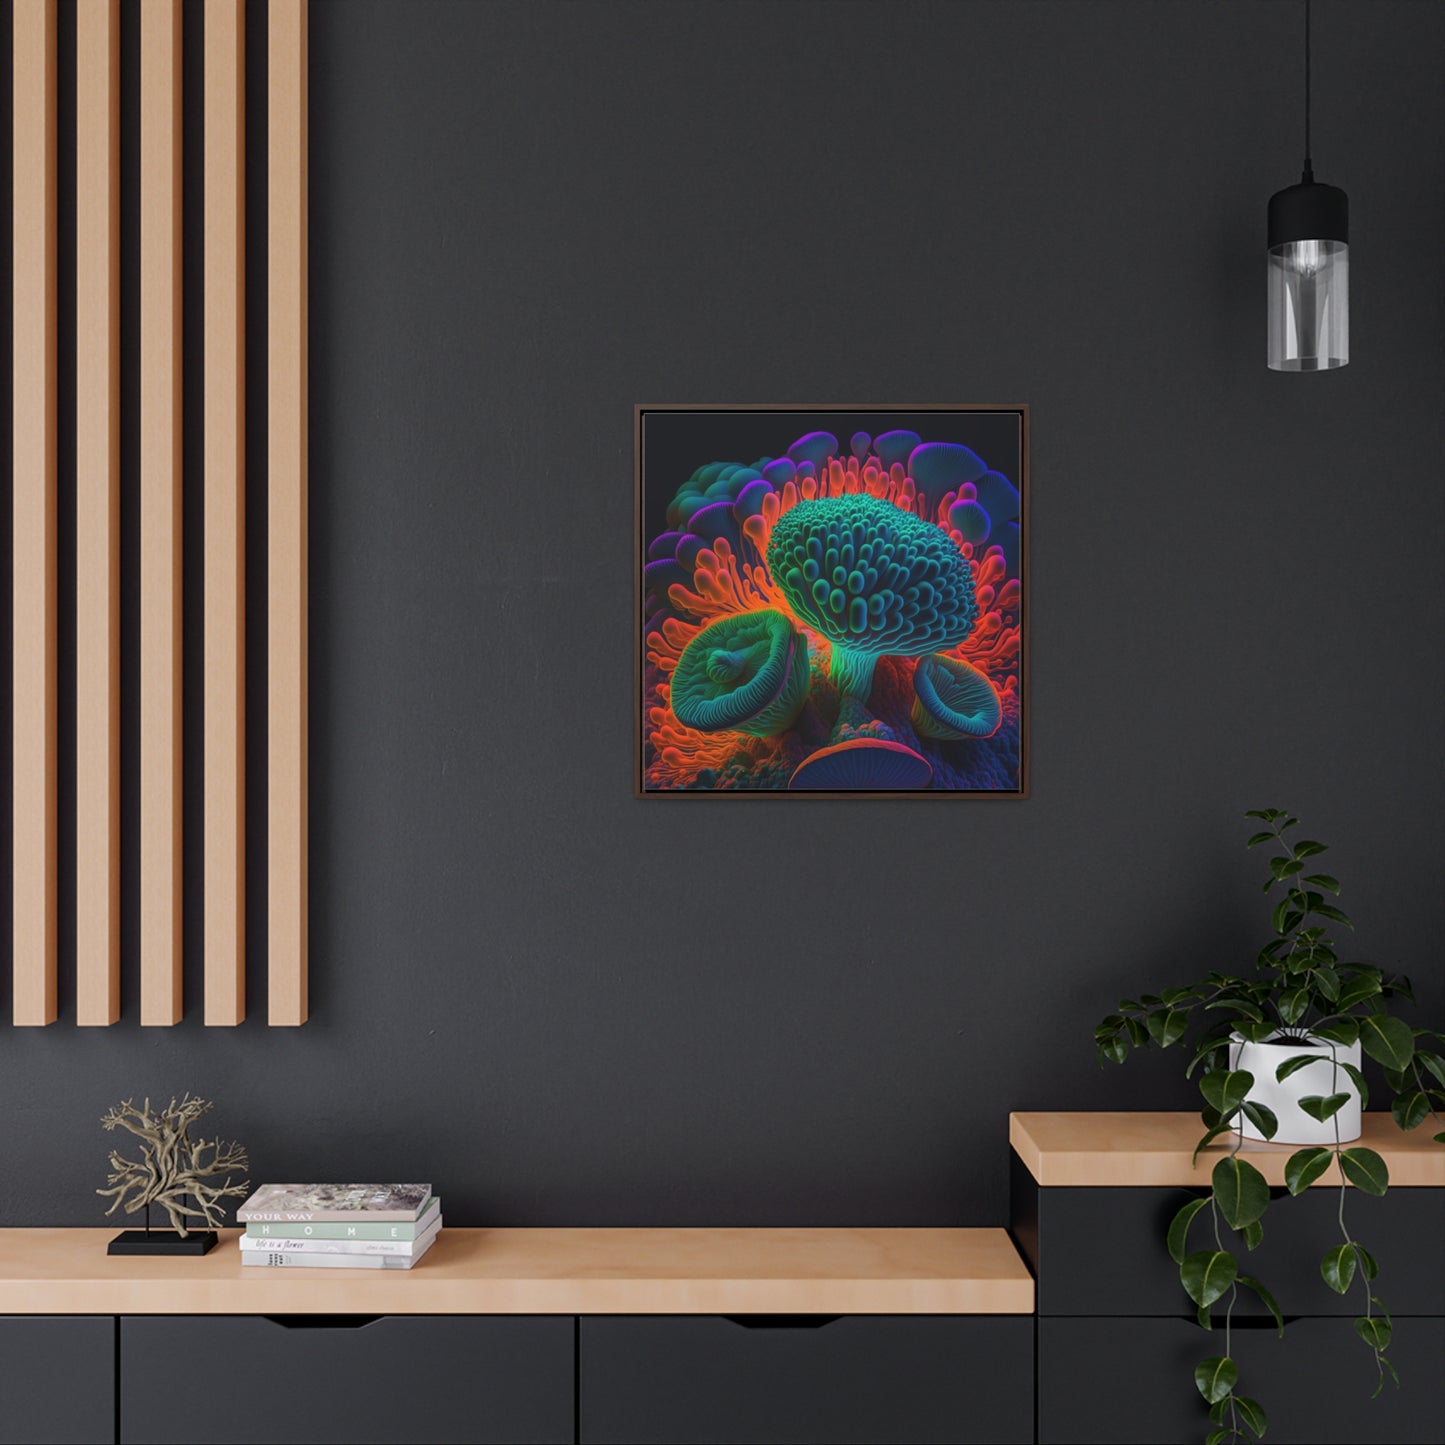 Gallery Canvas Wraps, Square Frame Macro Reef Florescent 3